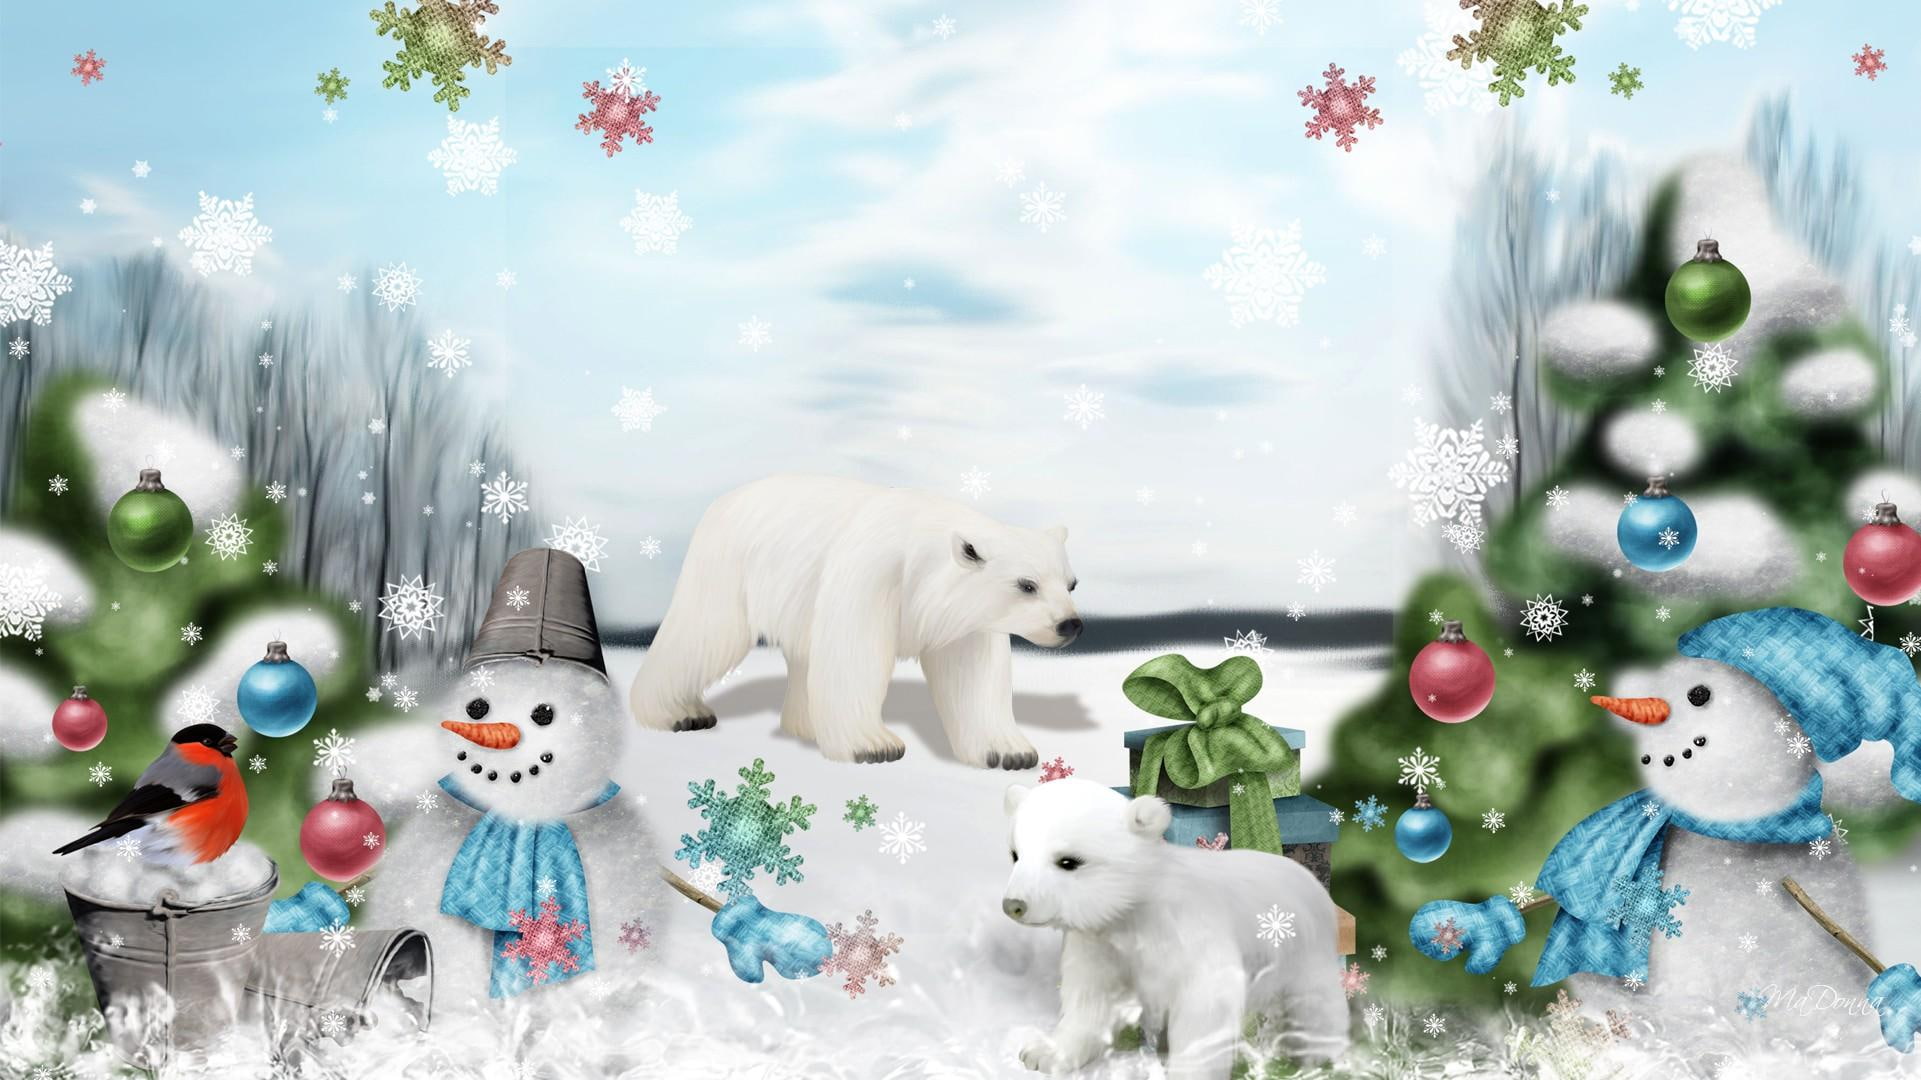 Christmas In The North, 2 polar bear and snowman illustration board